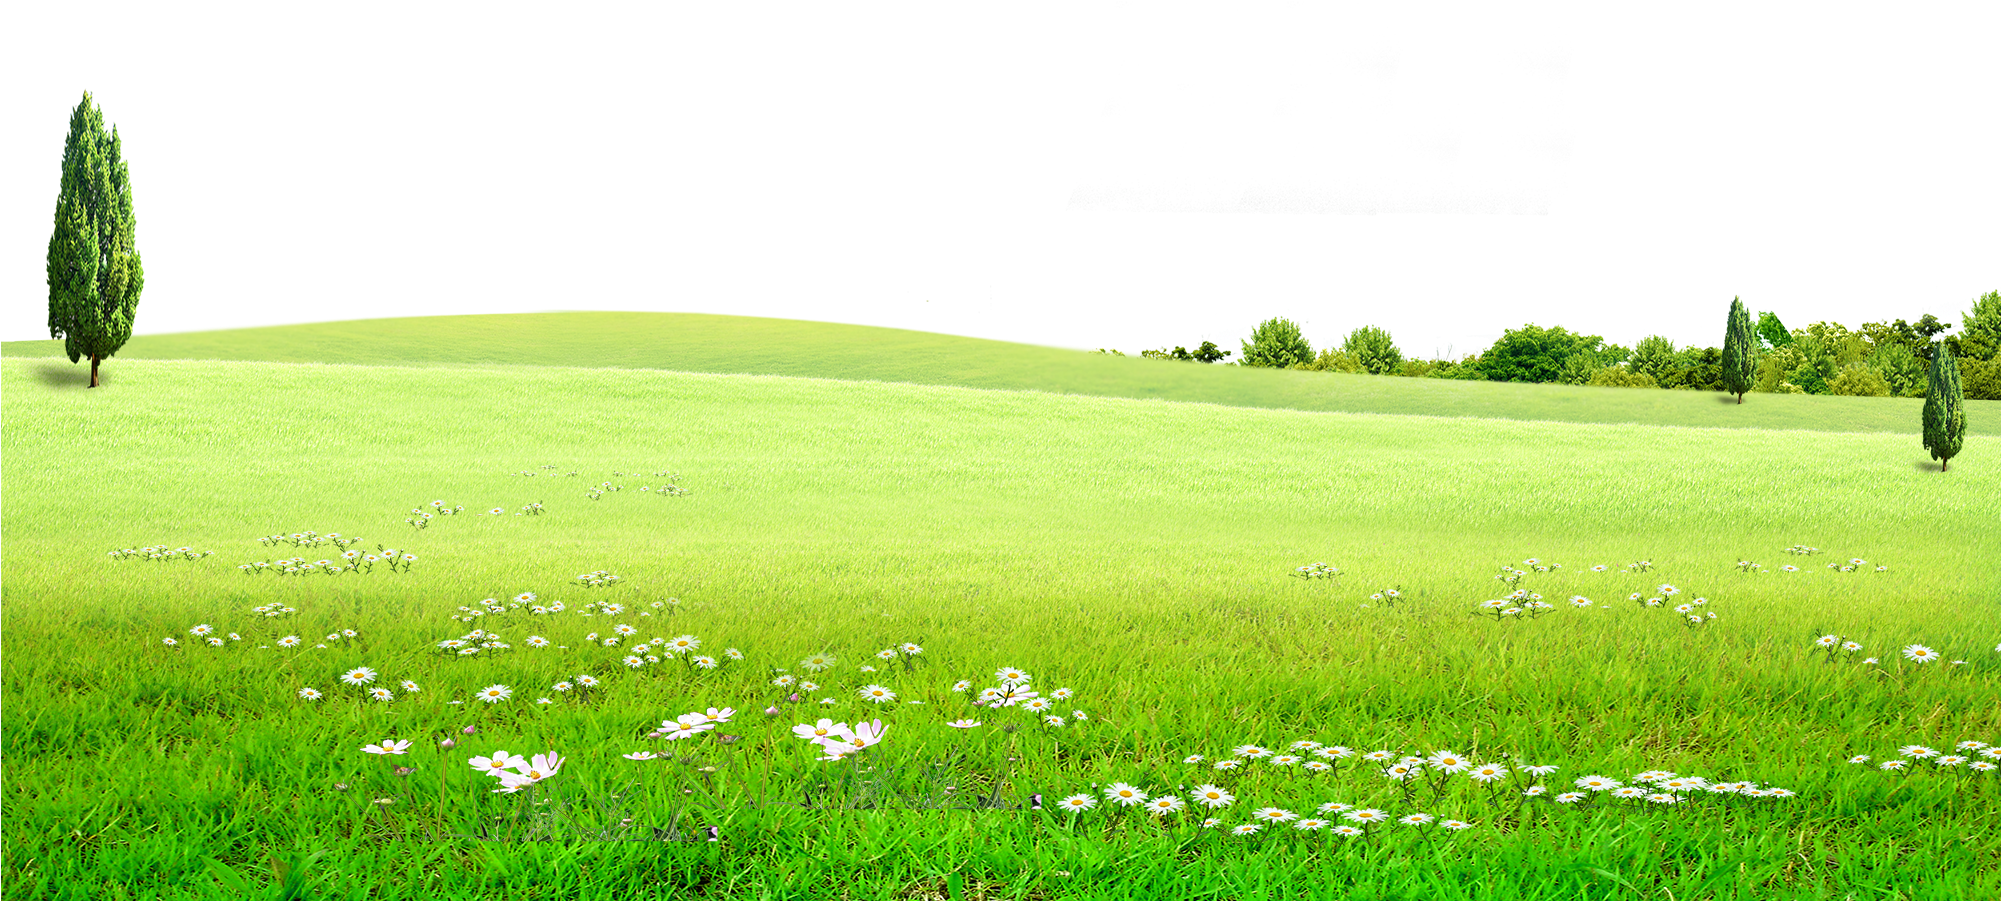 Field Green Landscape HQ Image Free PNG Image